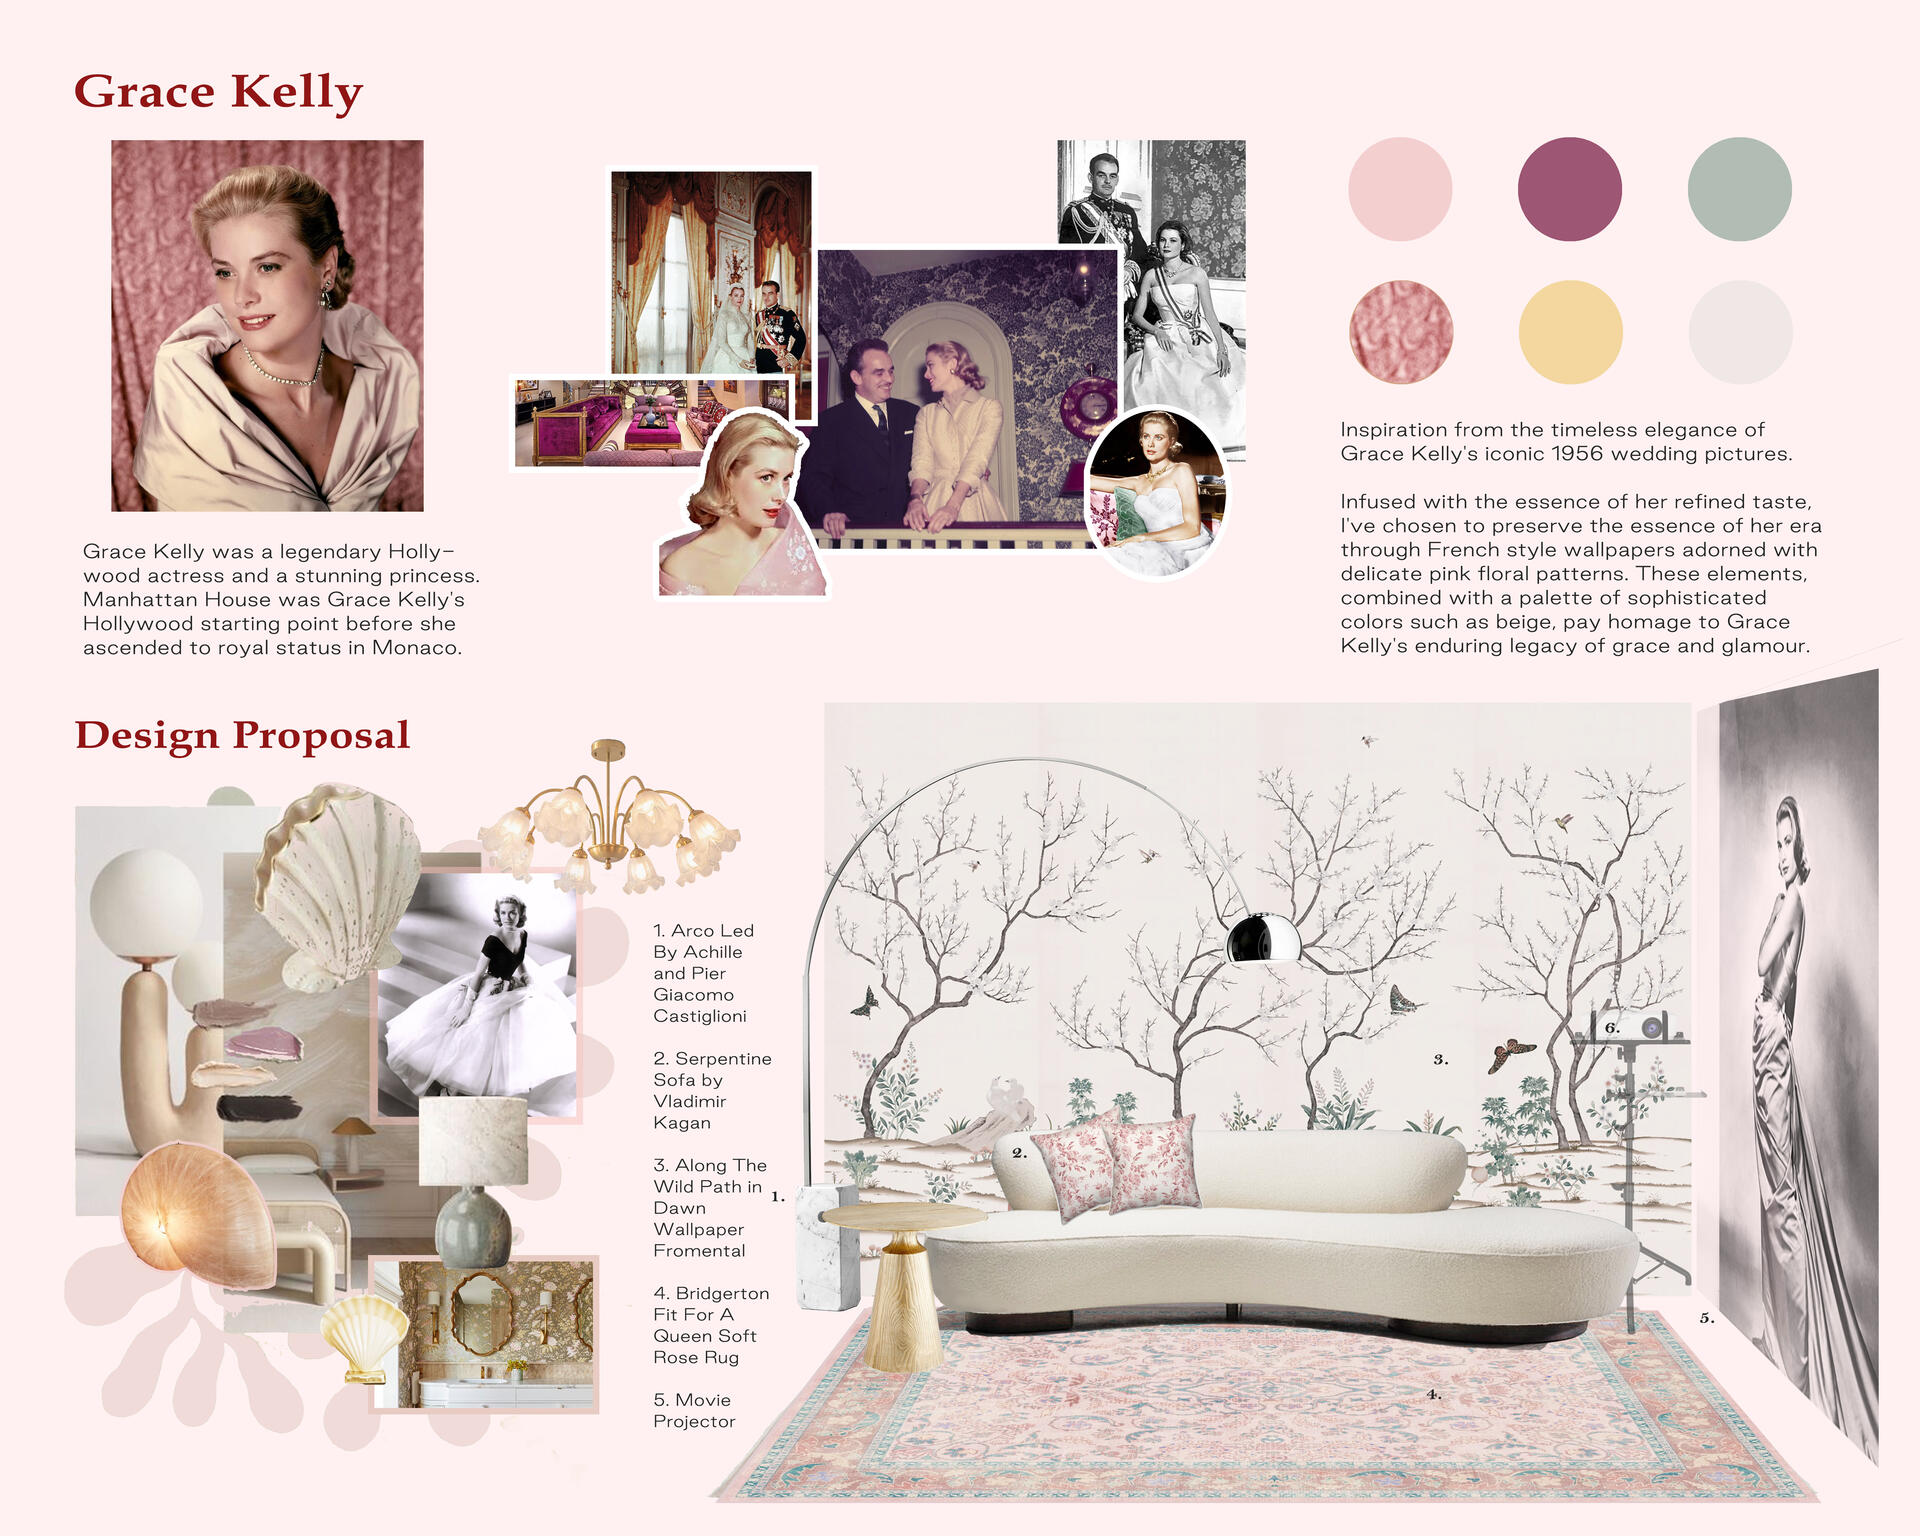  Grace Kelly Inspired Interior Design Proposal